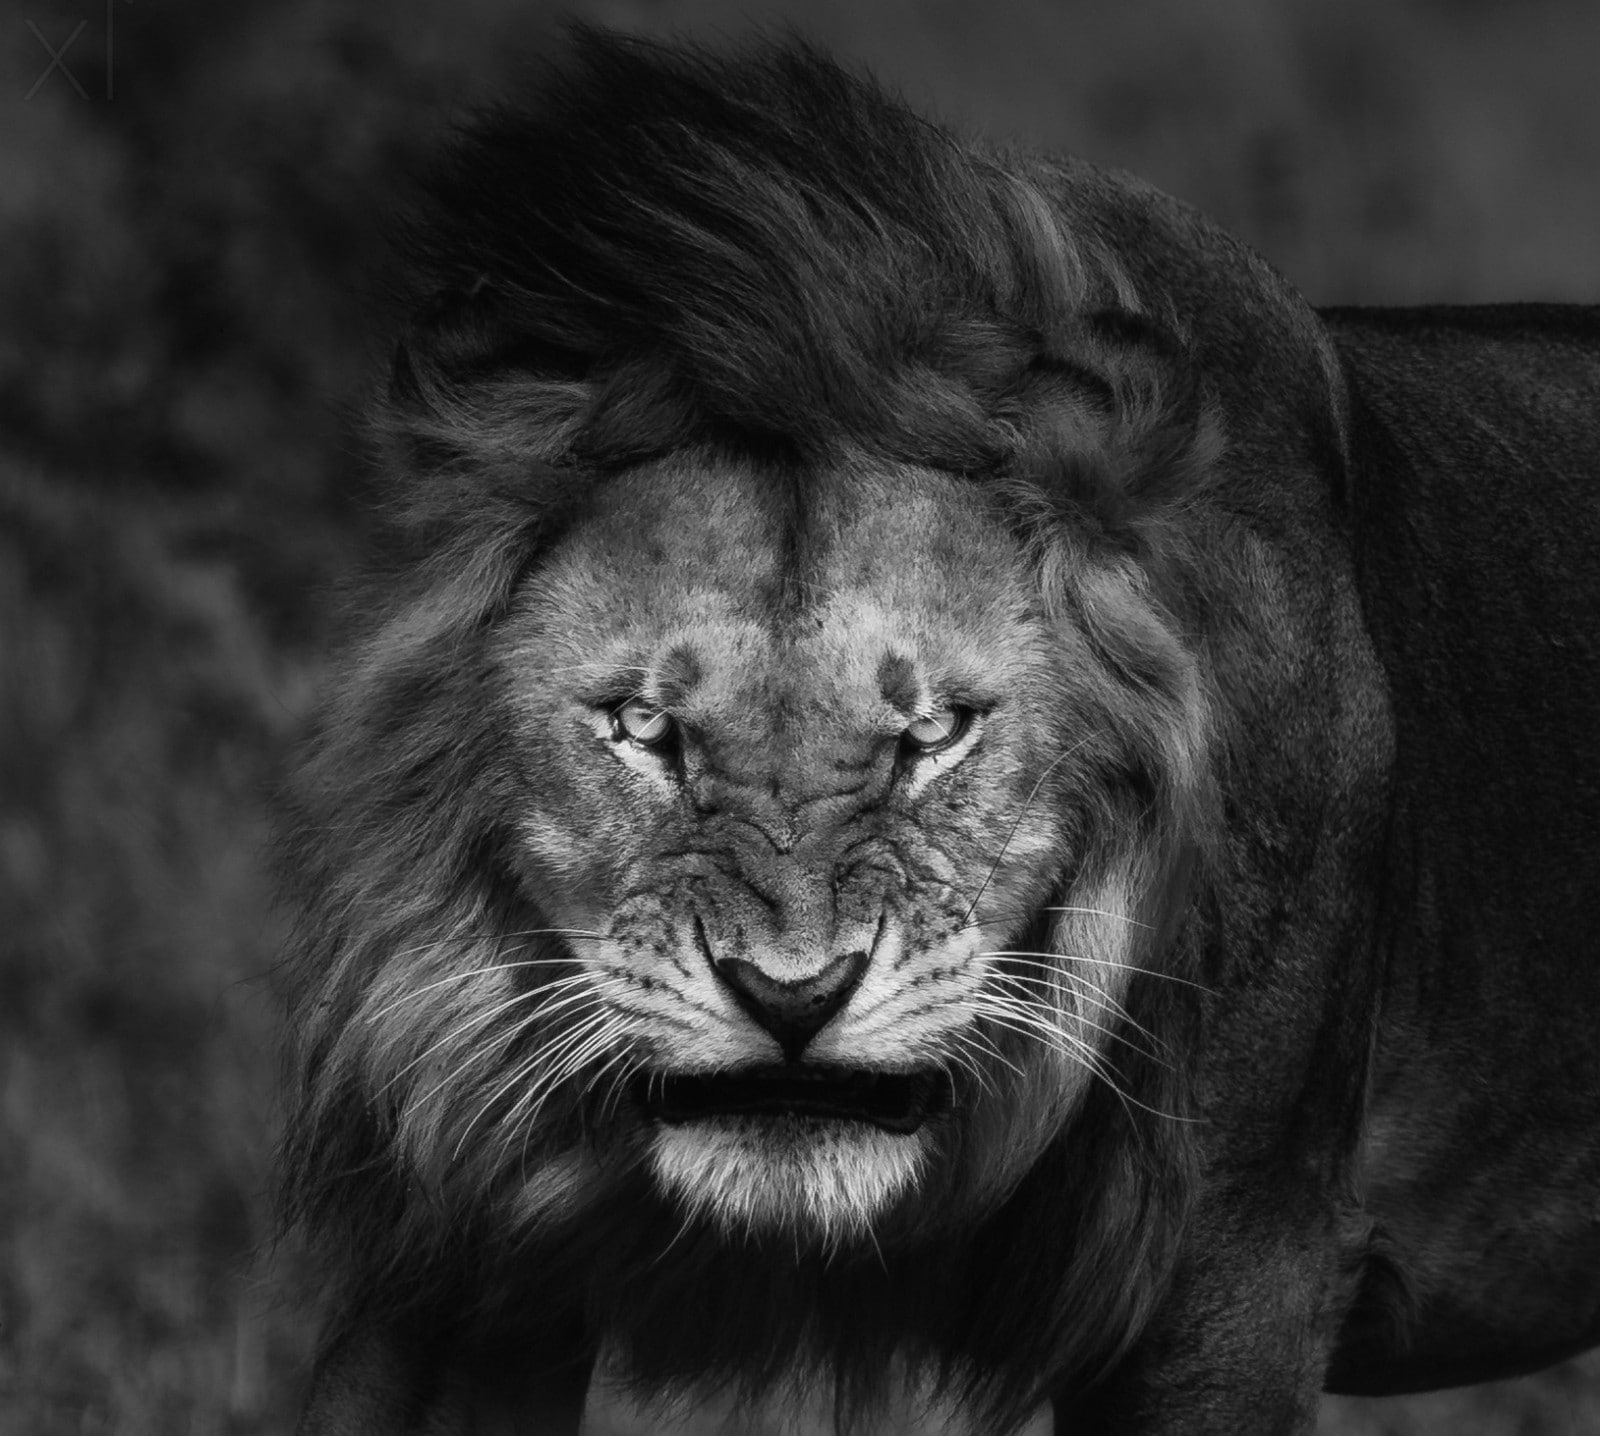 nature lion big cats fury angry portrait monochrome animals king